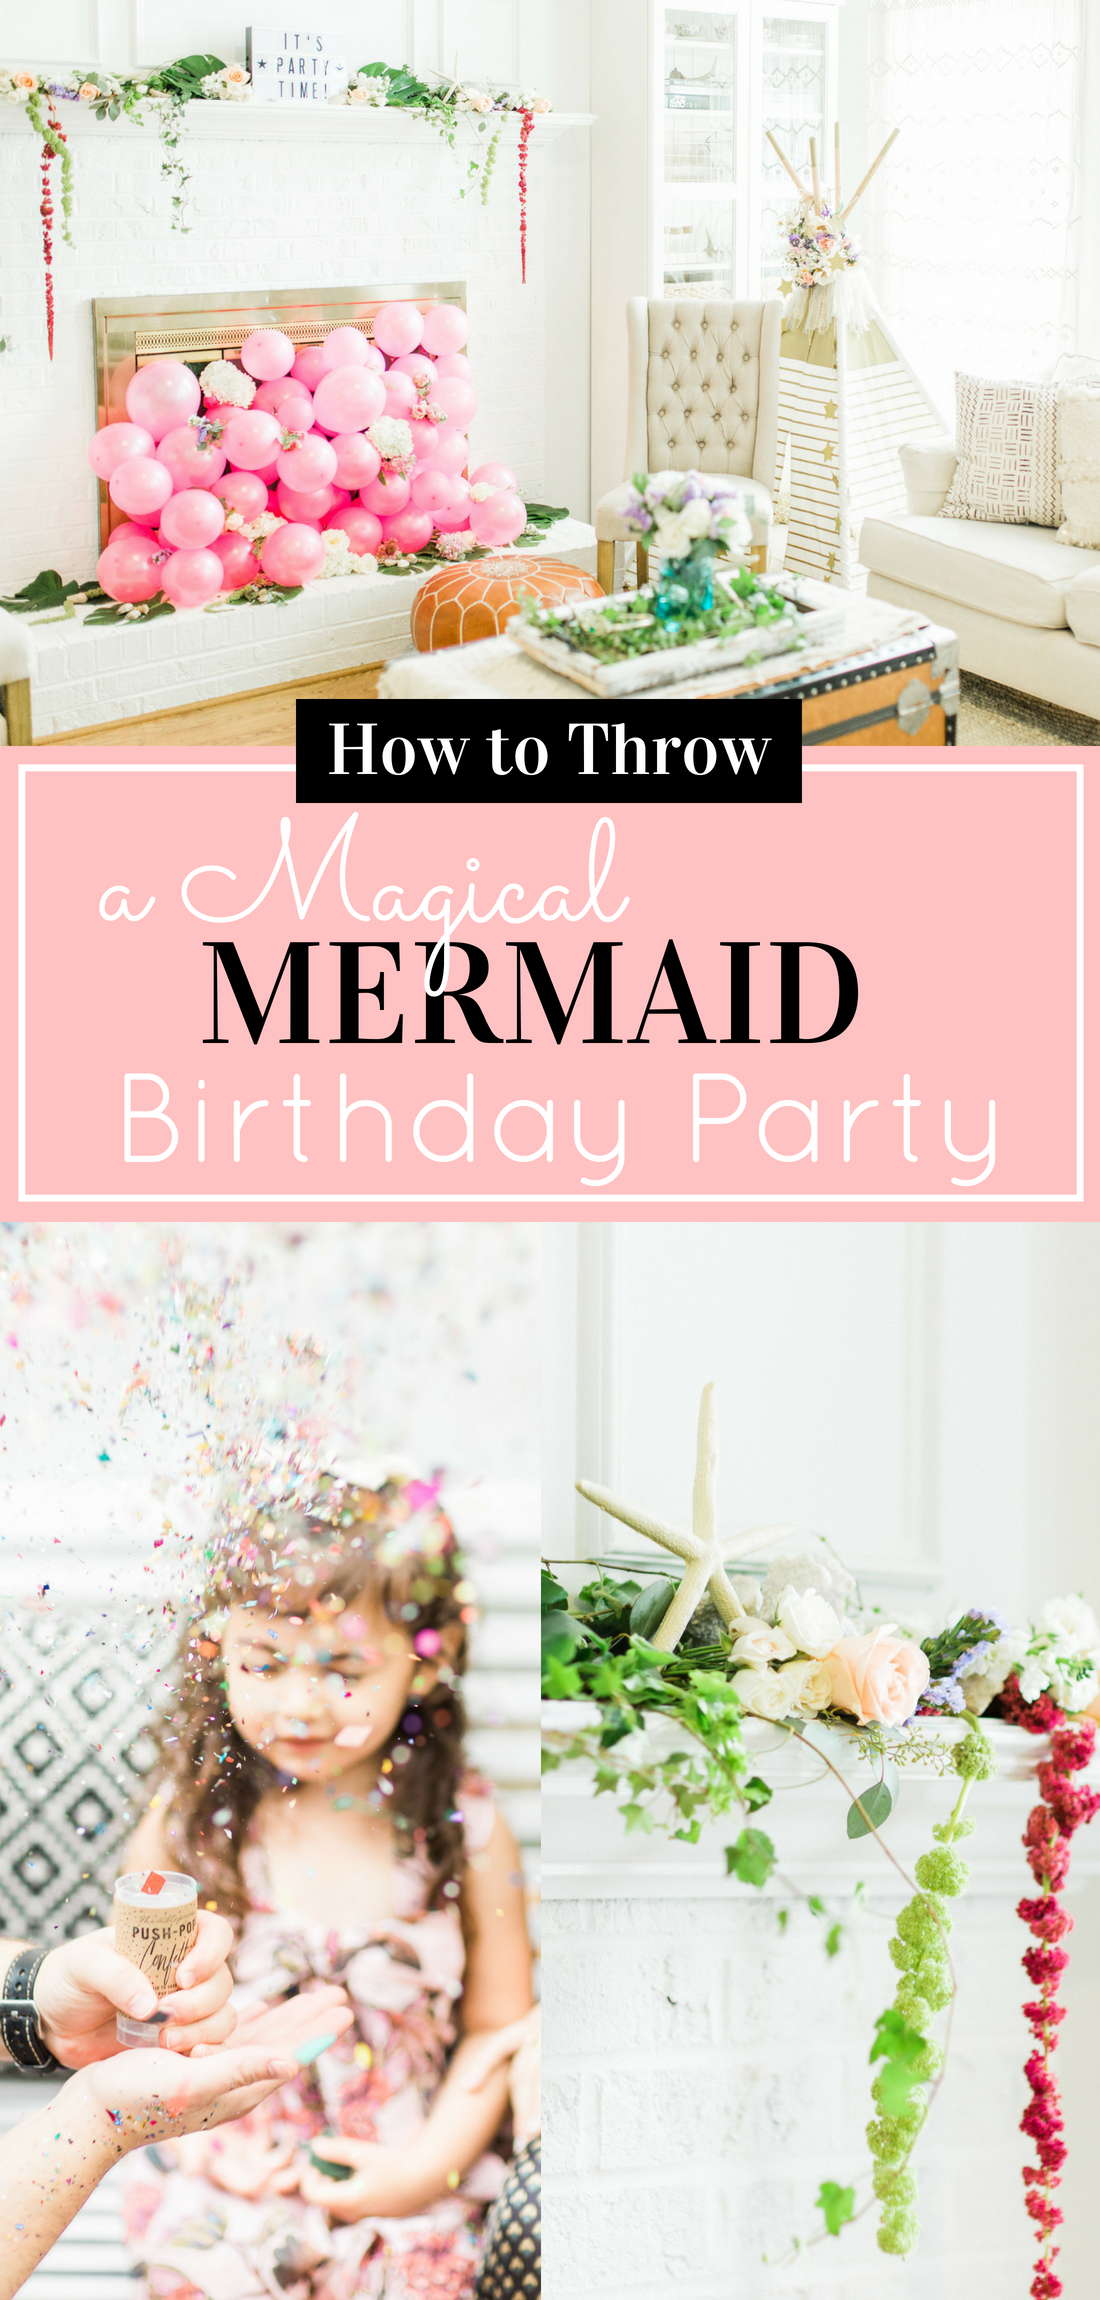 Behind-the-scenes of a magical, whimsical little girl's mermaid birthday party, complete with mermaid dessert bar, games, prizes, and crafts. Click through for the details. #mermaidparty #birthdayparty #kidsparty #mermaidbirthday #mermaid #seaparty #oceanparty #partyinspiration | glitterinc.com | @glitterinc